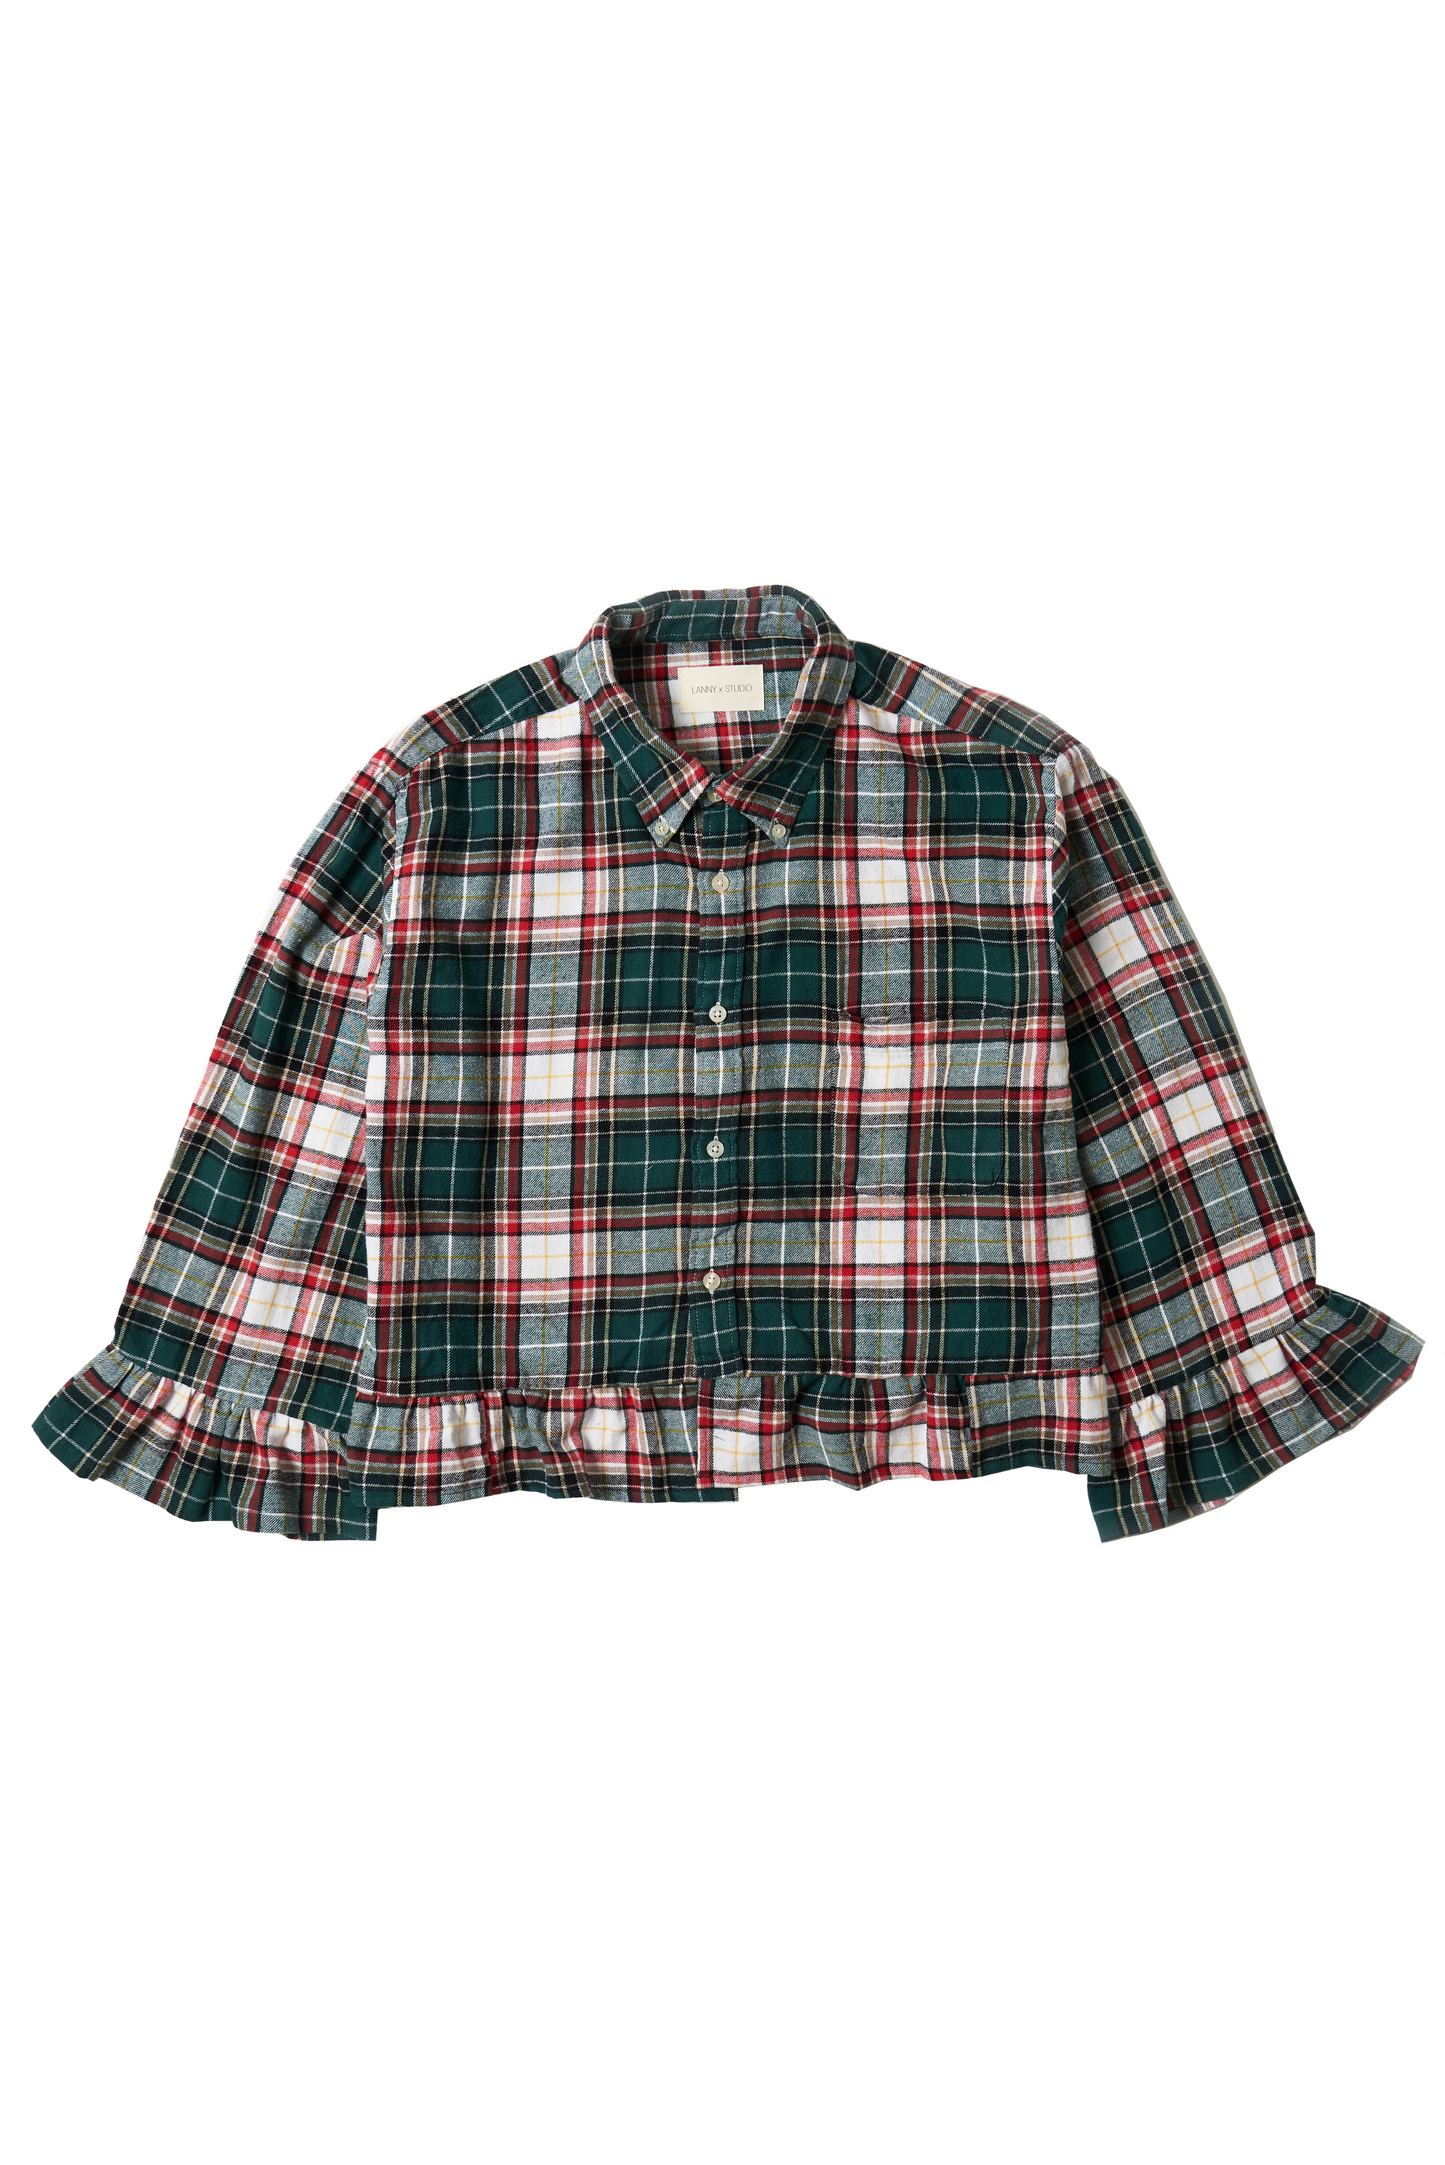 Upcycled Green & Red Check Shirt